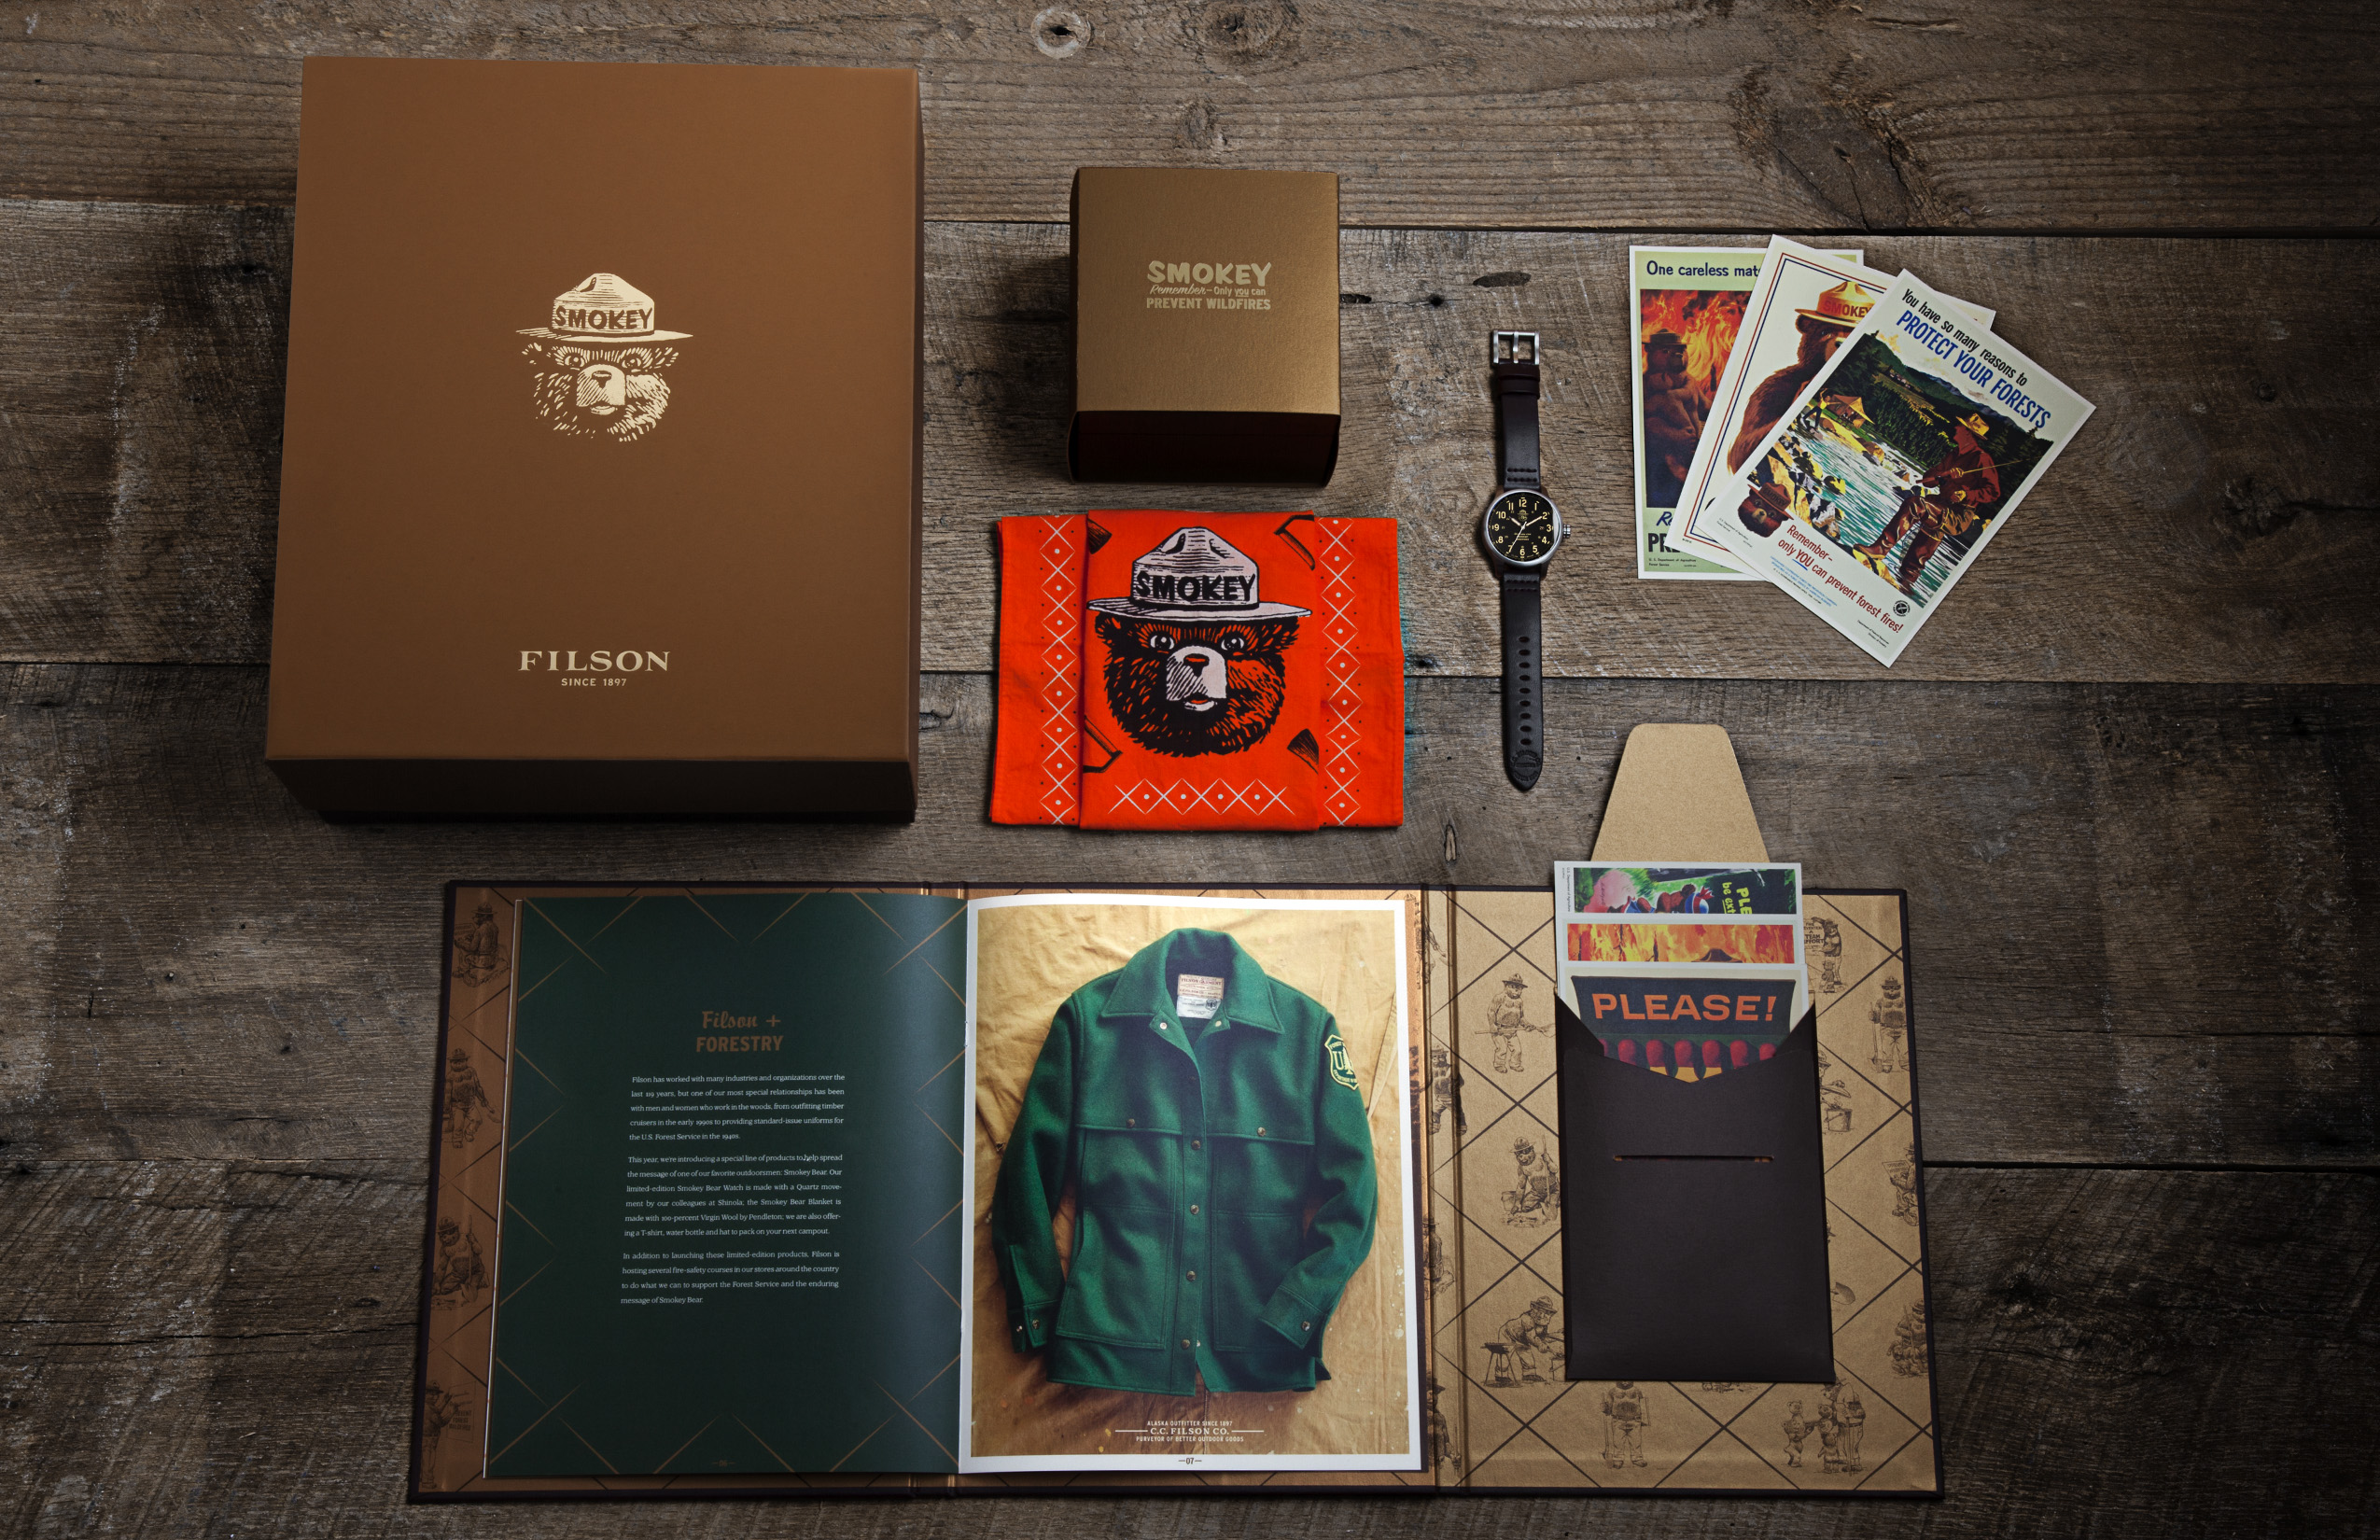 Filson's Smokey Bear watch set retails for $1,000 and launches August 1